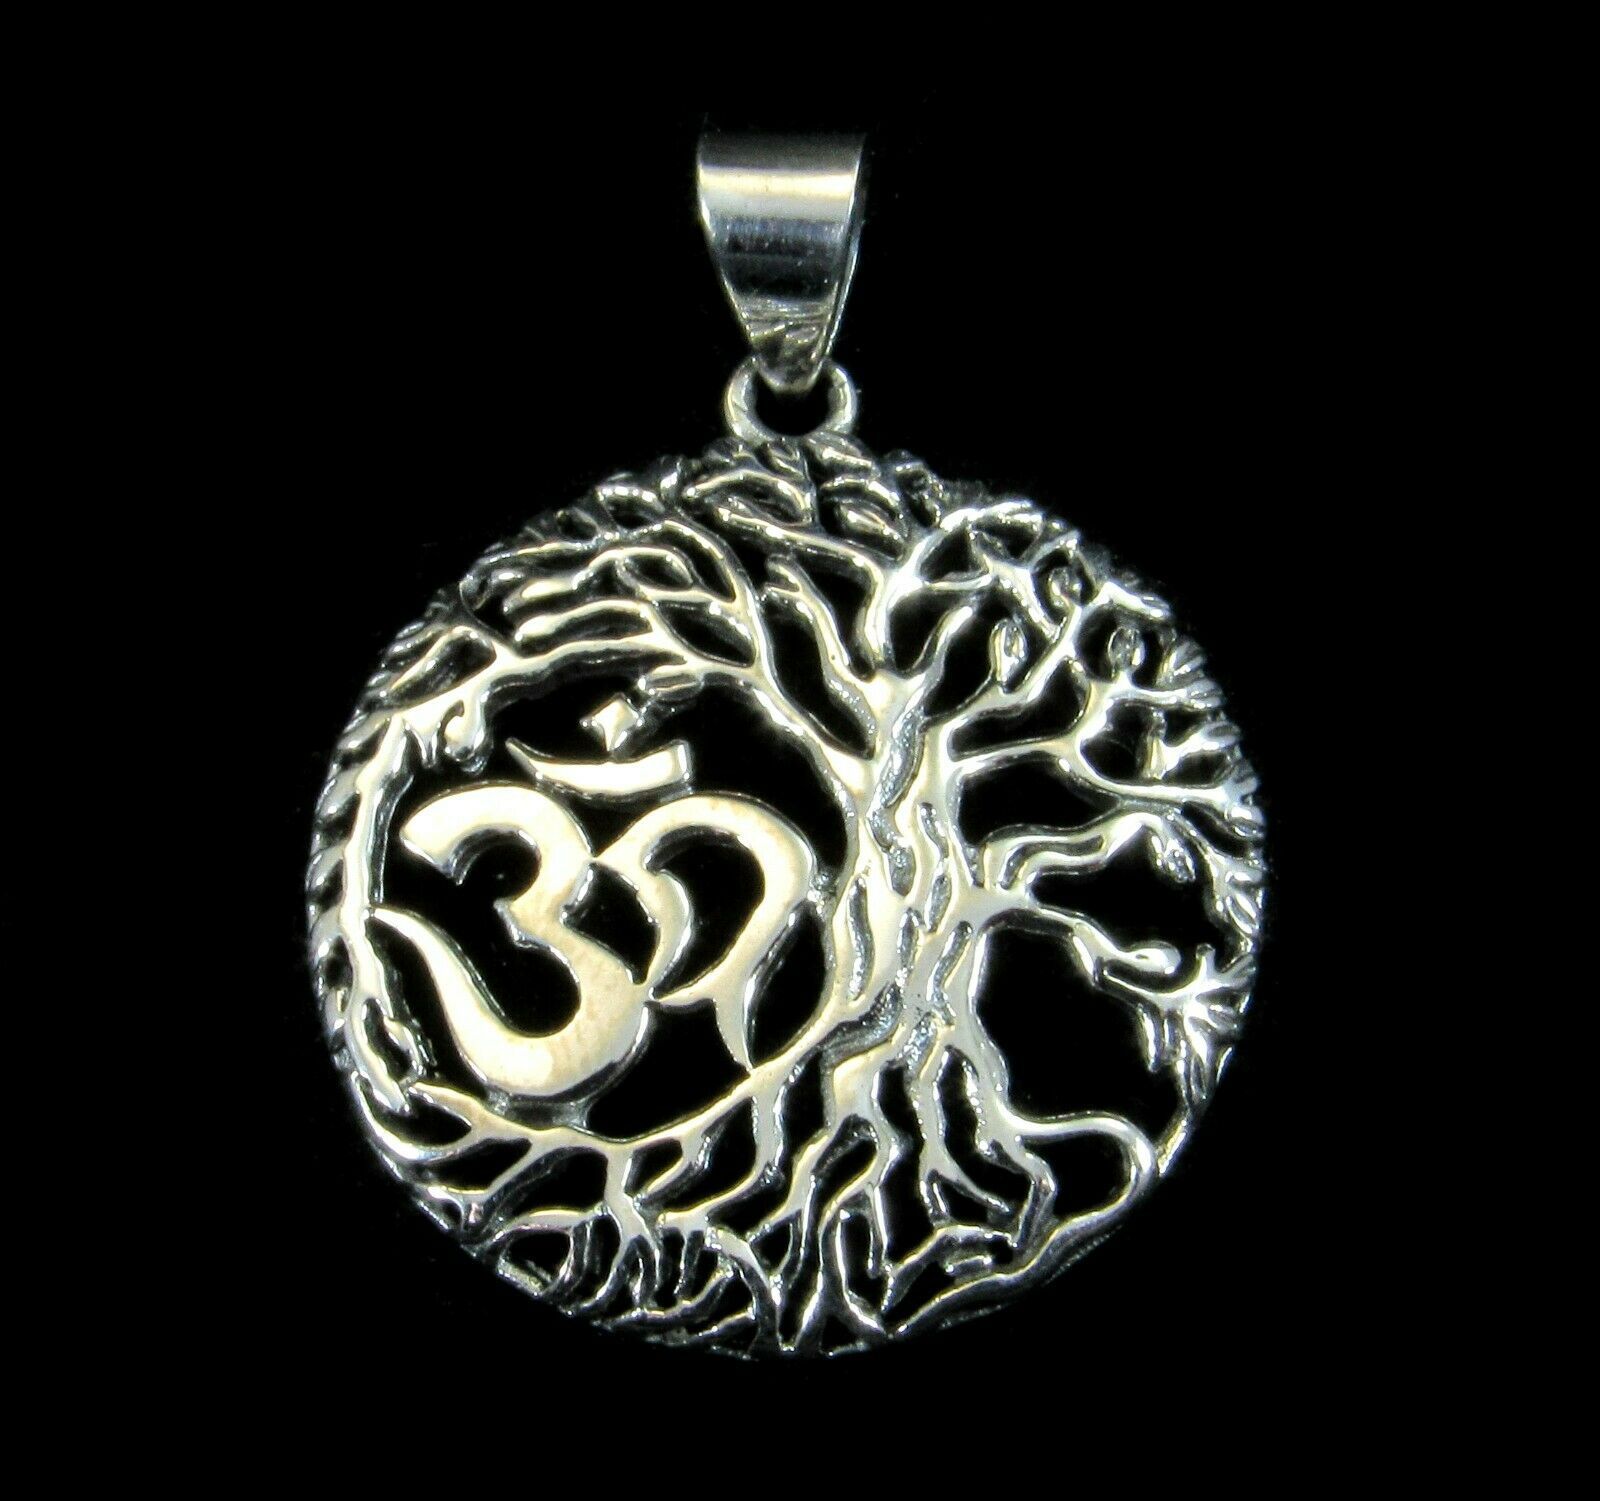 Solid 925 Sterling Silver OM Aum Ohm Tree of Life Yggdrasil Pendant Yoga Amulet